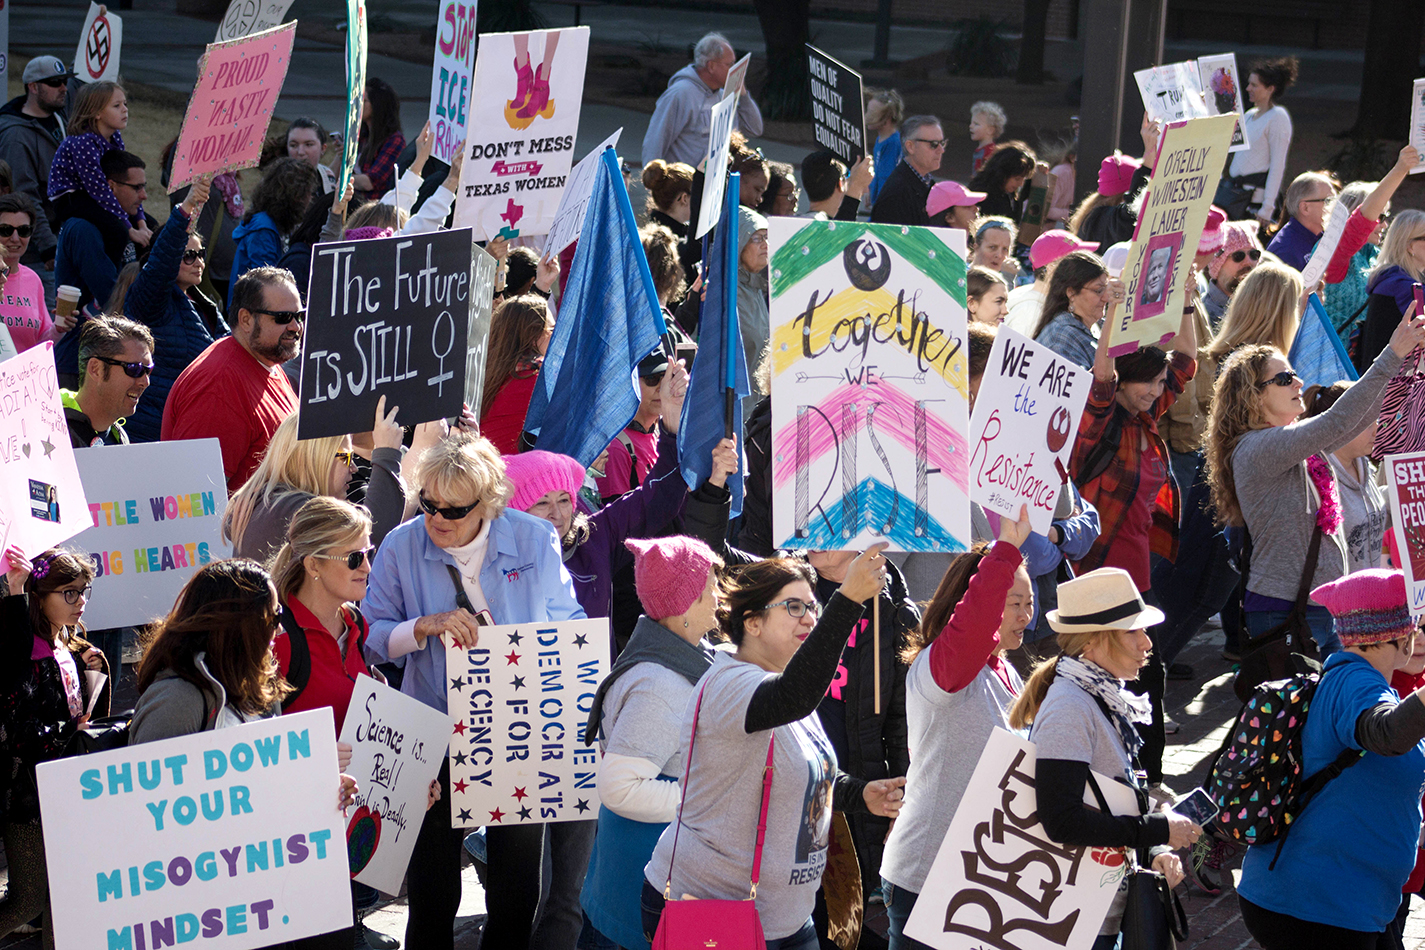 People from various walks of life and across varying genders attend the Women’s March Jan. 20 in downtown Fort Worth. Organizers estimated 5,000 supporters took to the streets to show their support for women’s rights.